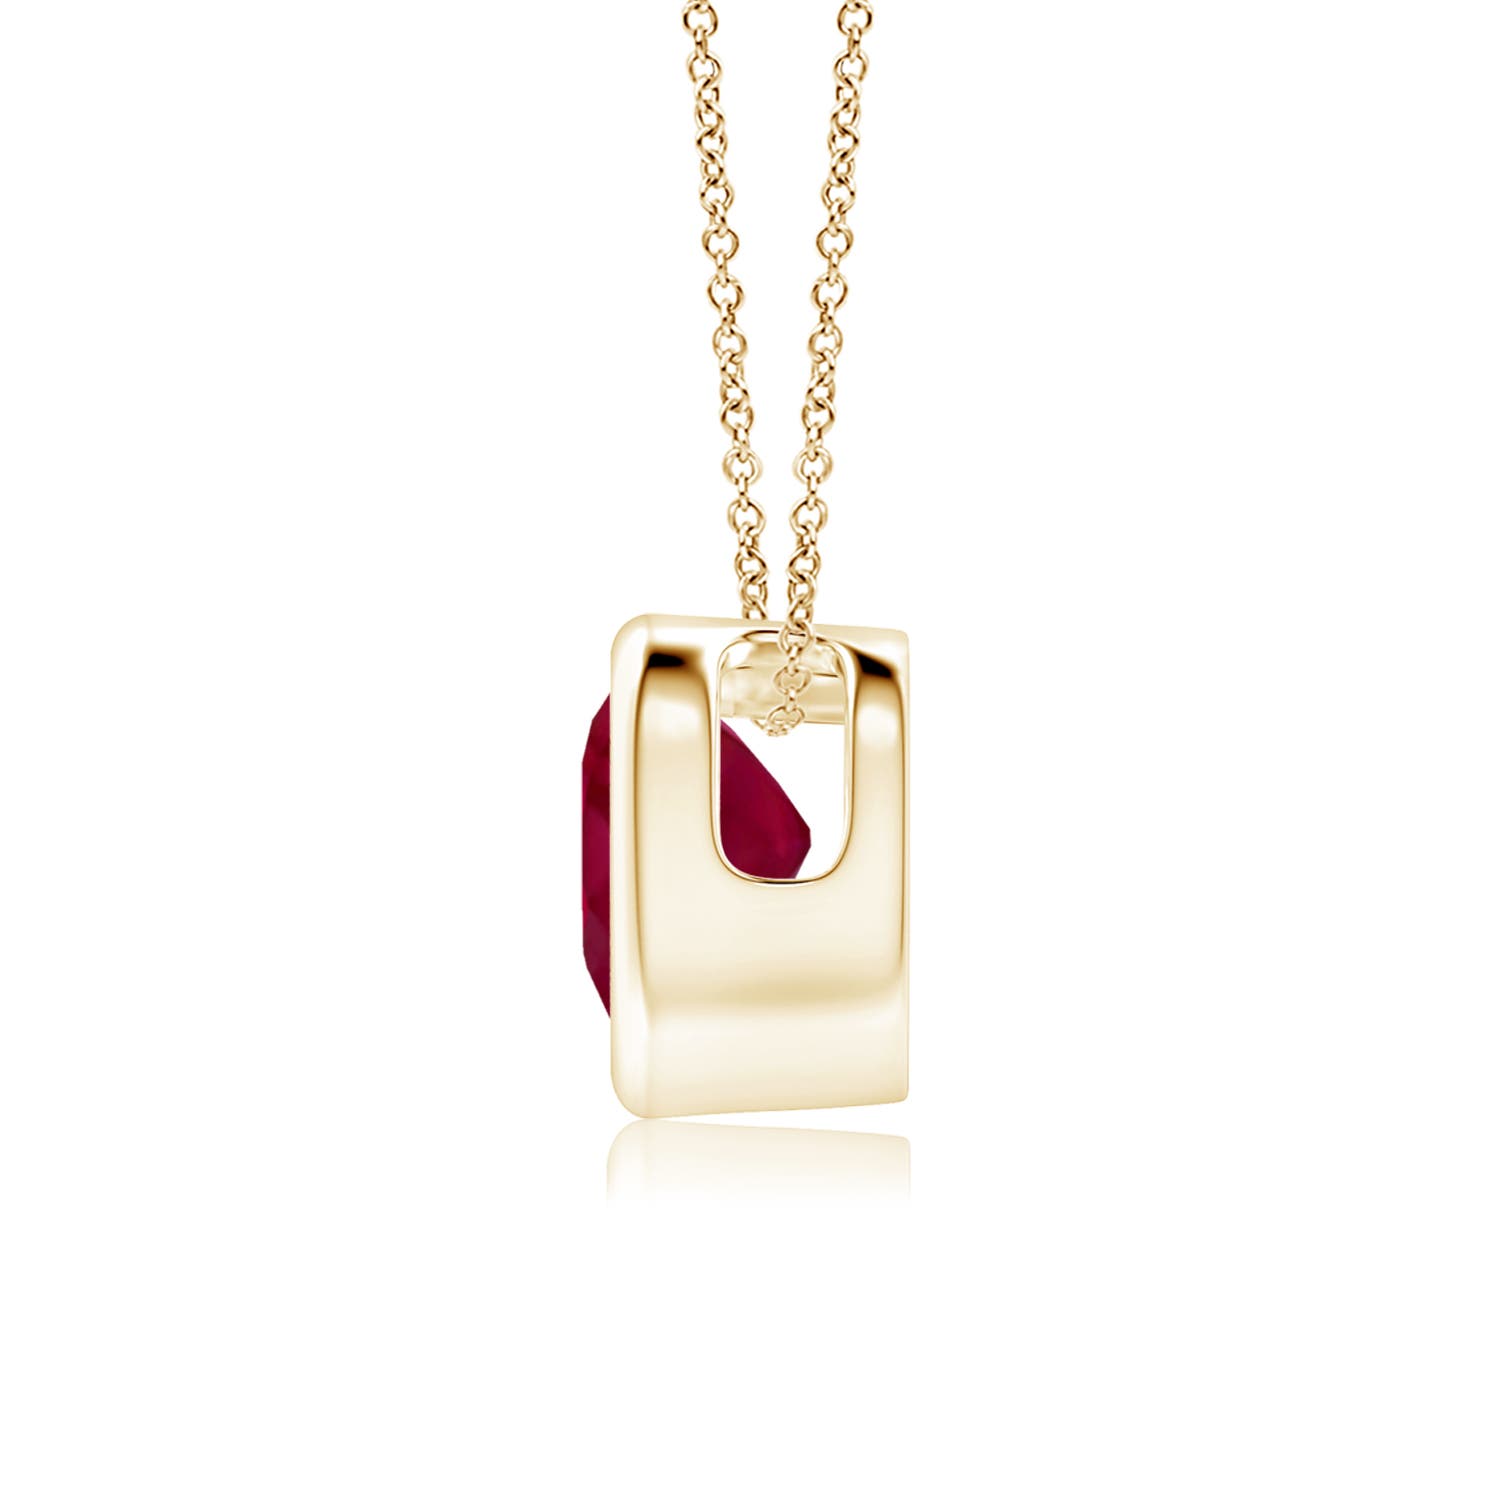 A - Ruby / 0.55 CT / 14 KT Yellow Gold